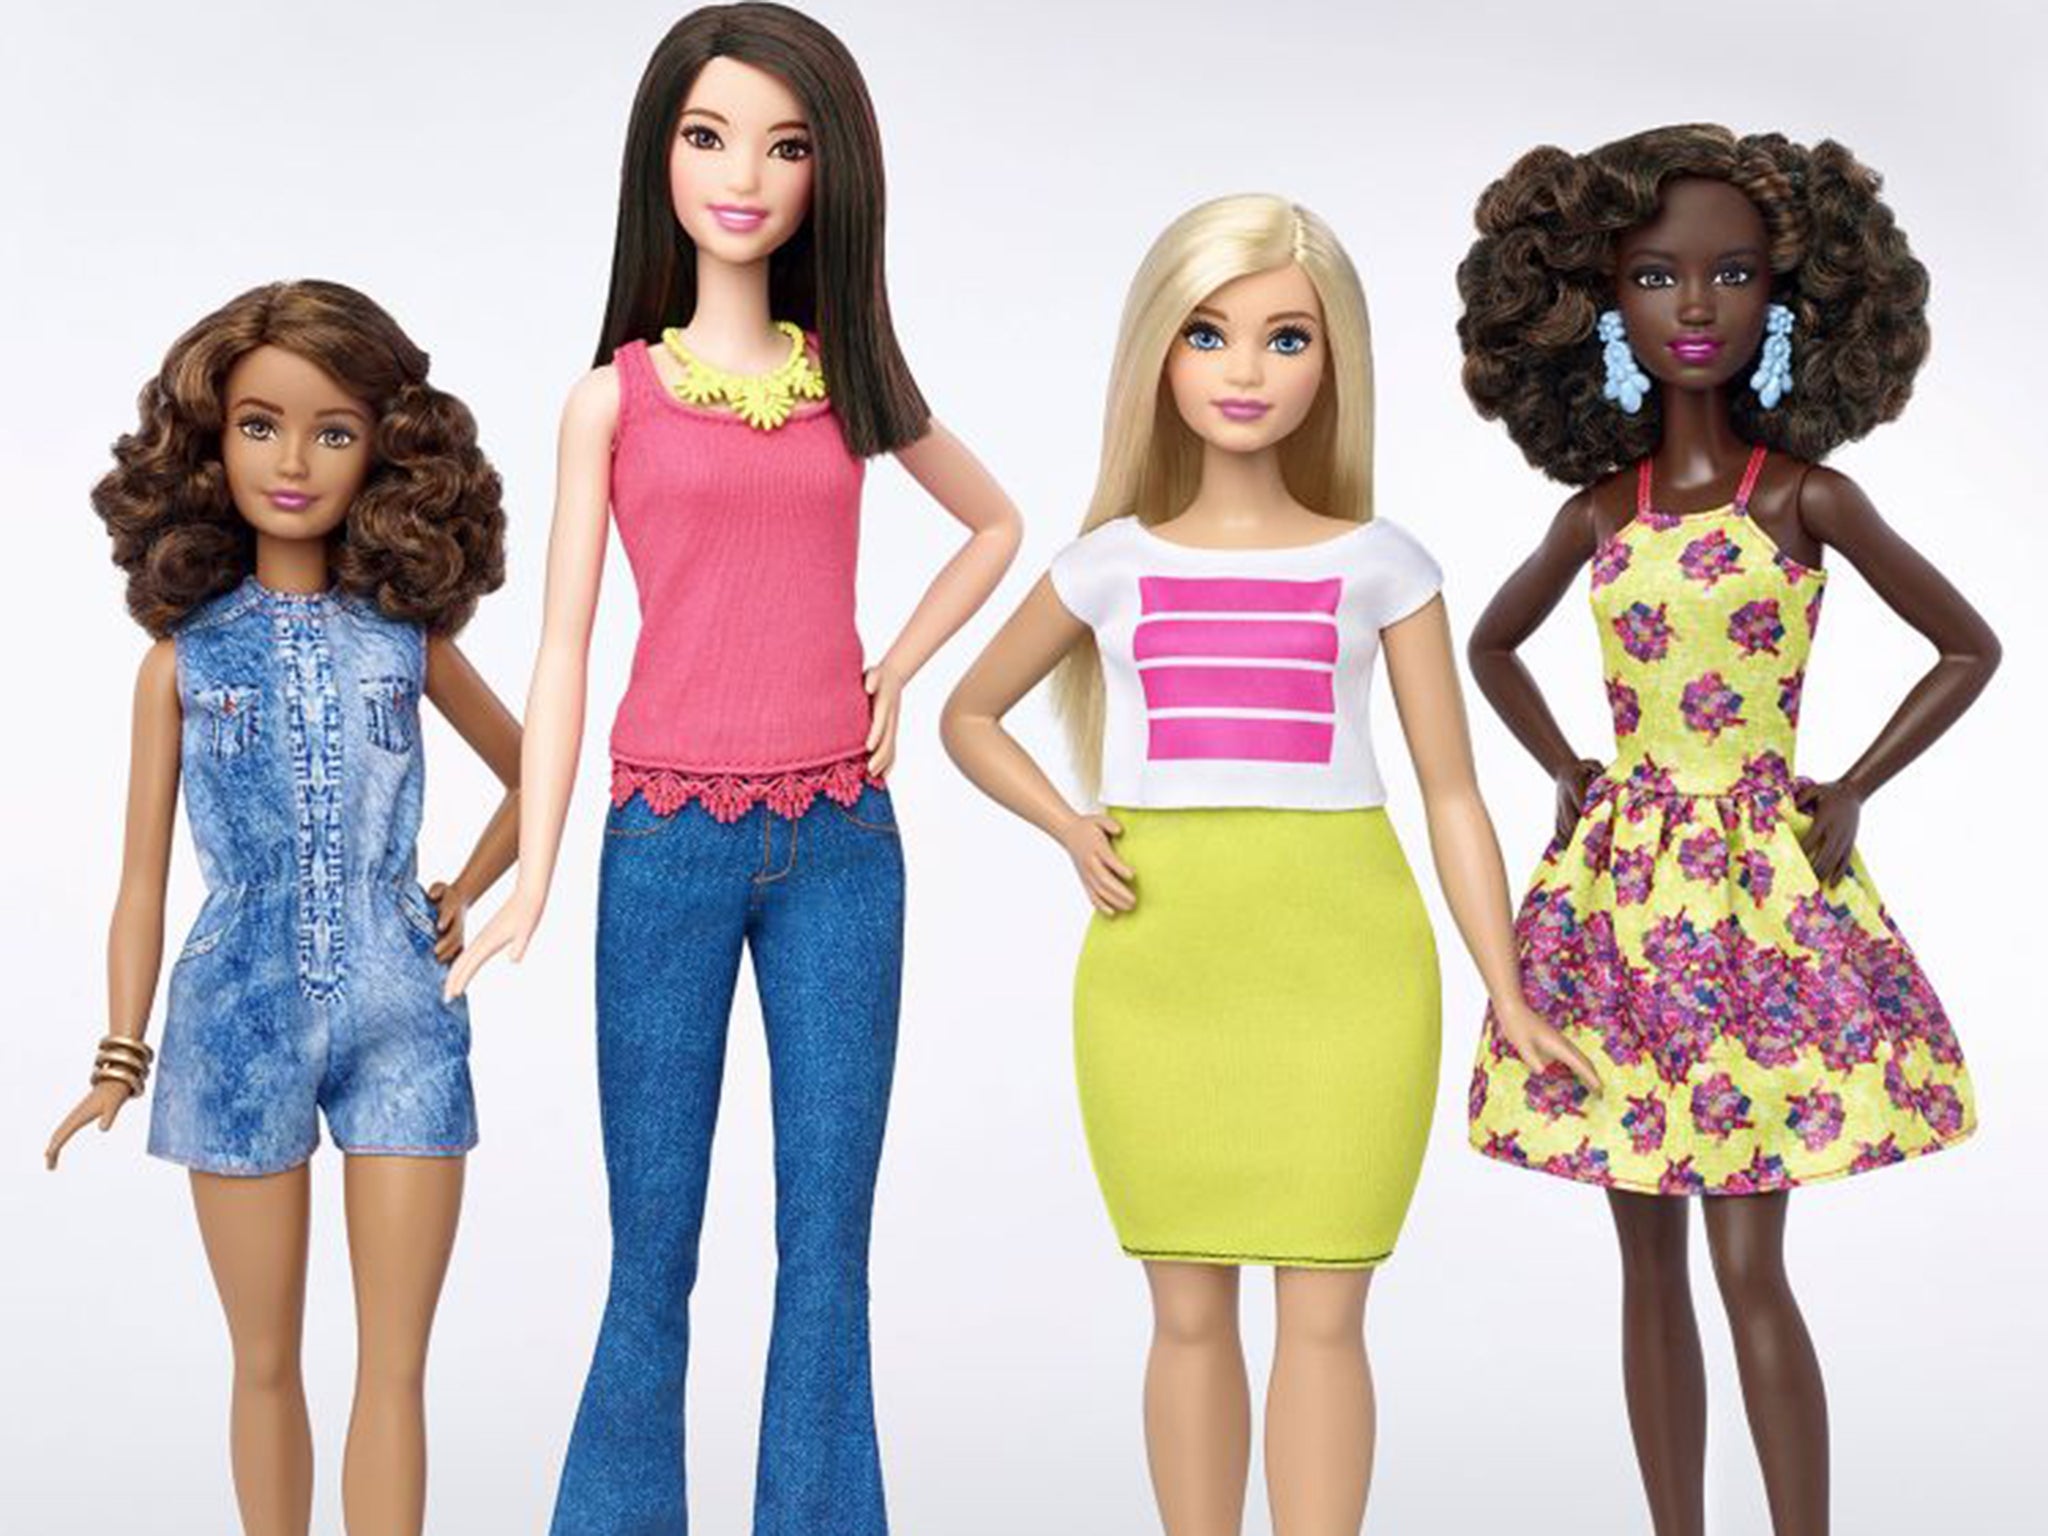 Barbie’s new realism includes non-white ethnicities and ‘petite’ and ‘curvy’ body shapes